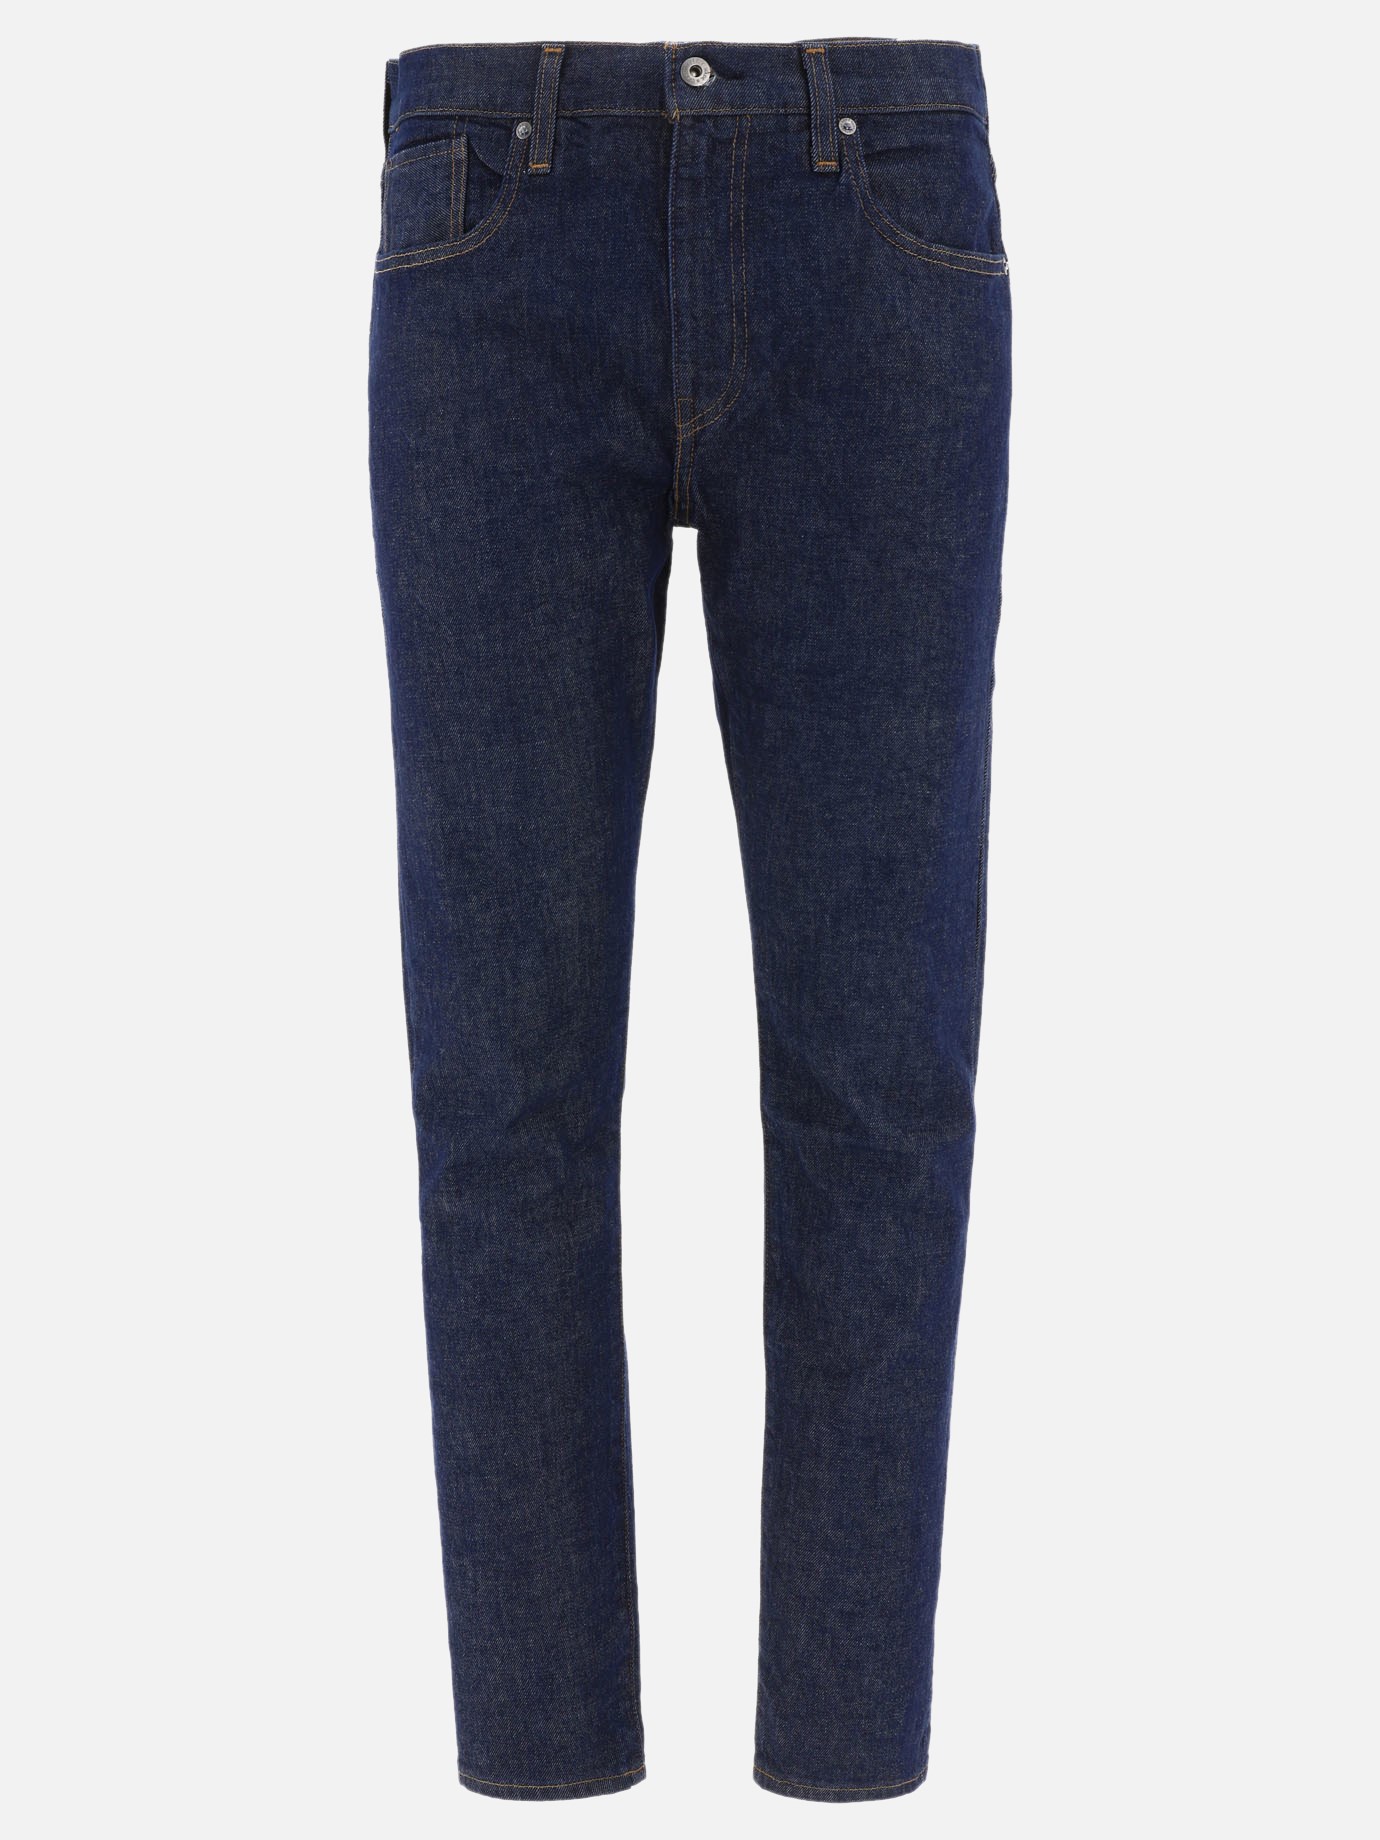 Jeans  512 Slim Taper by Levi's Made & Crafted - 5